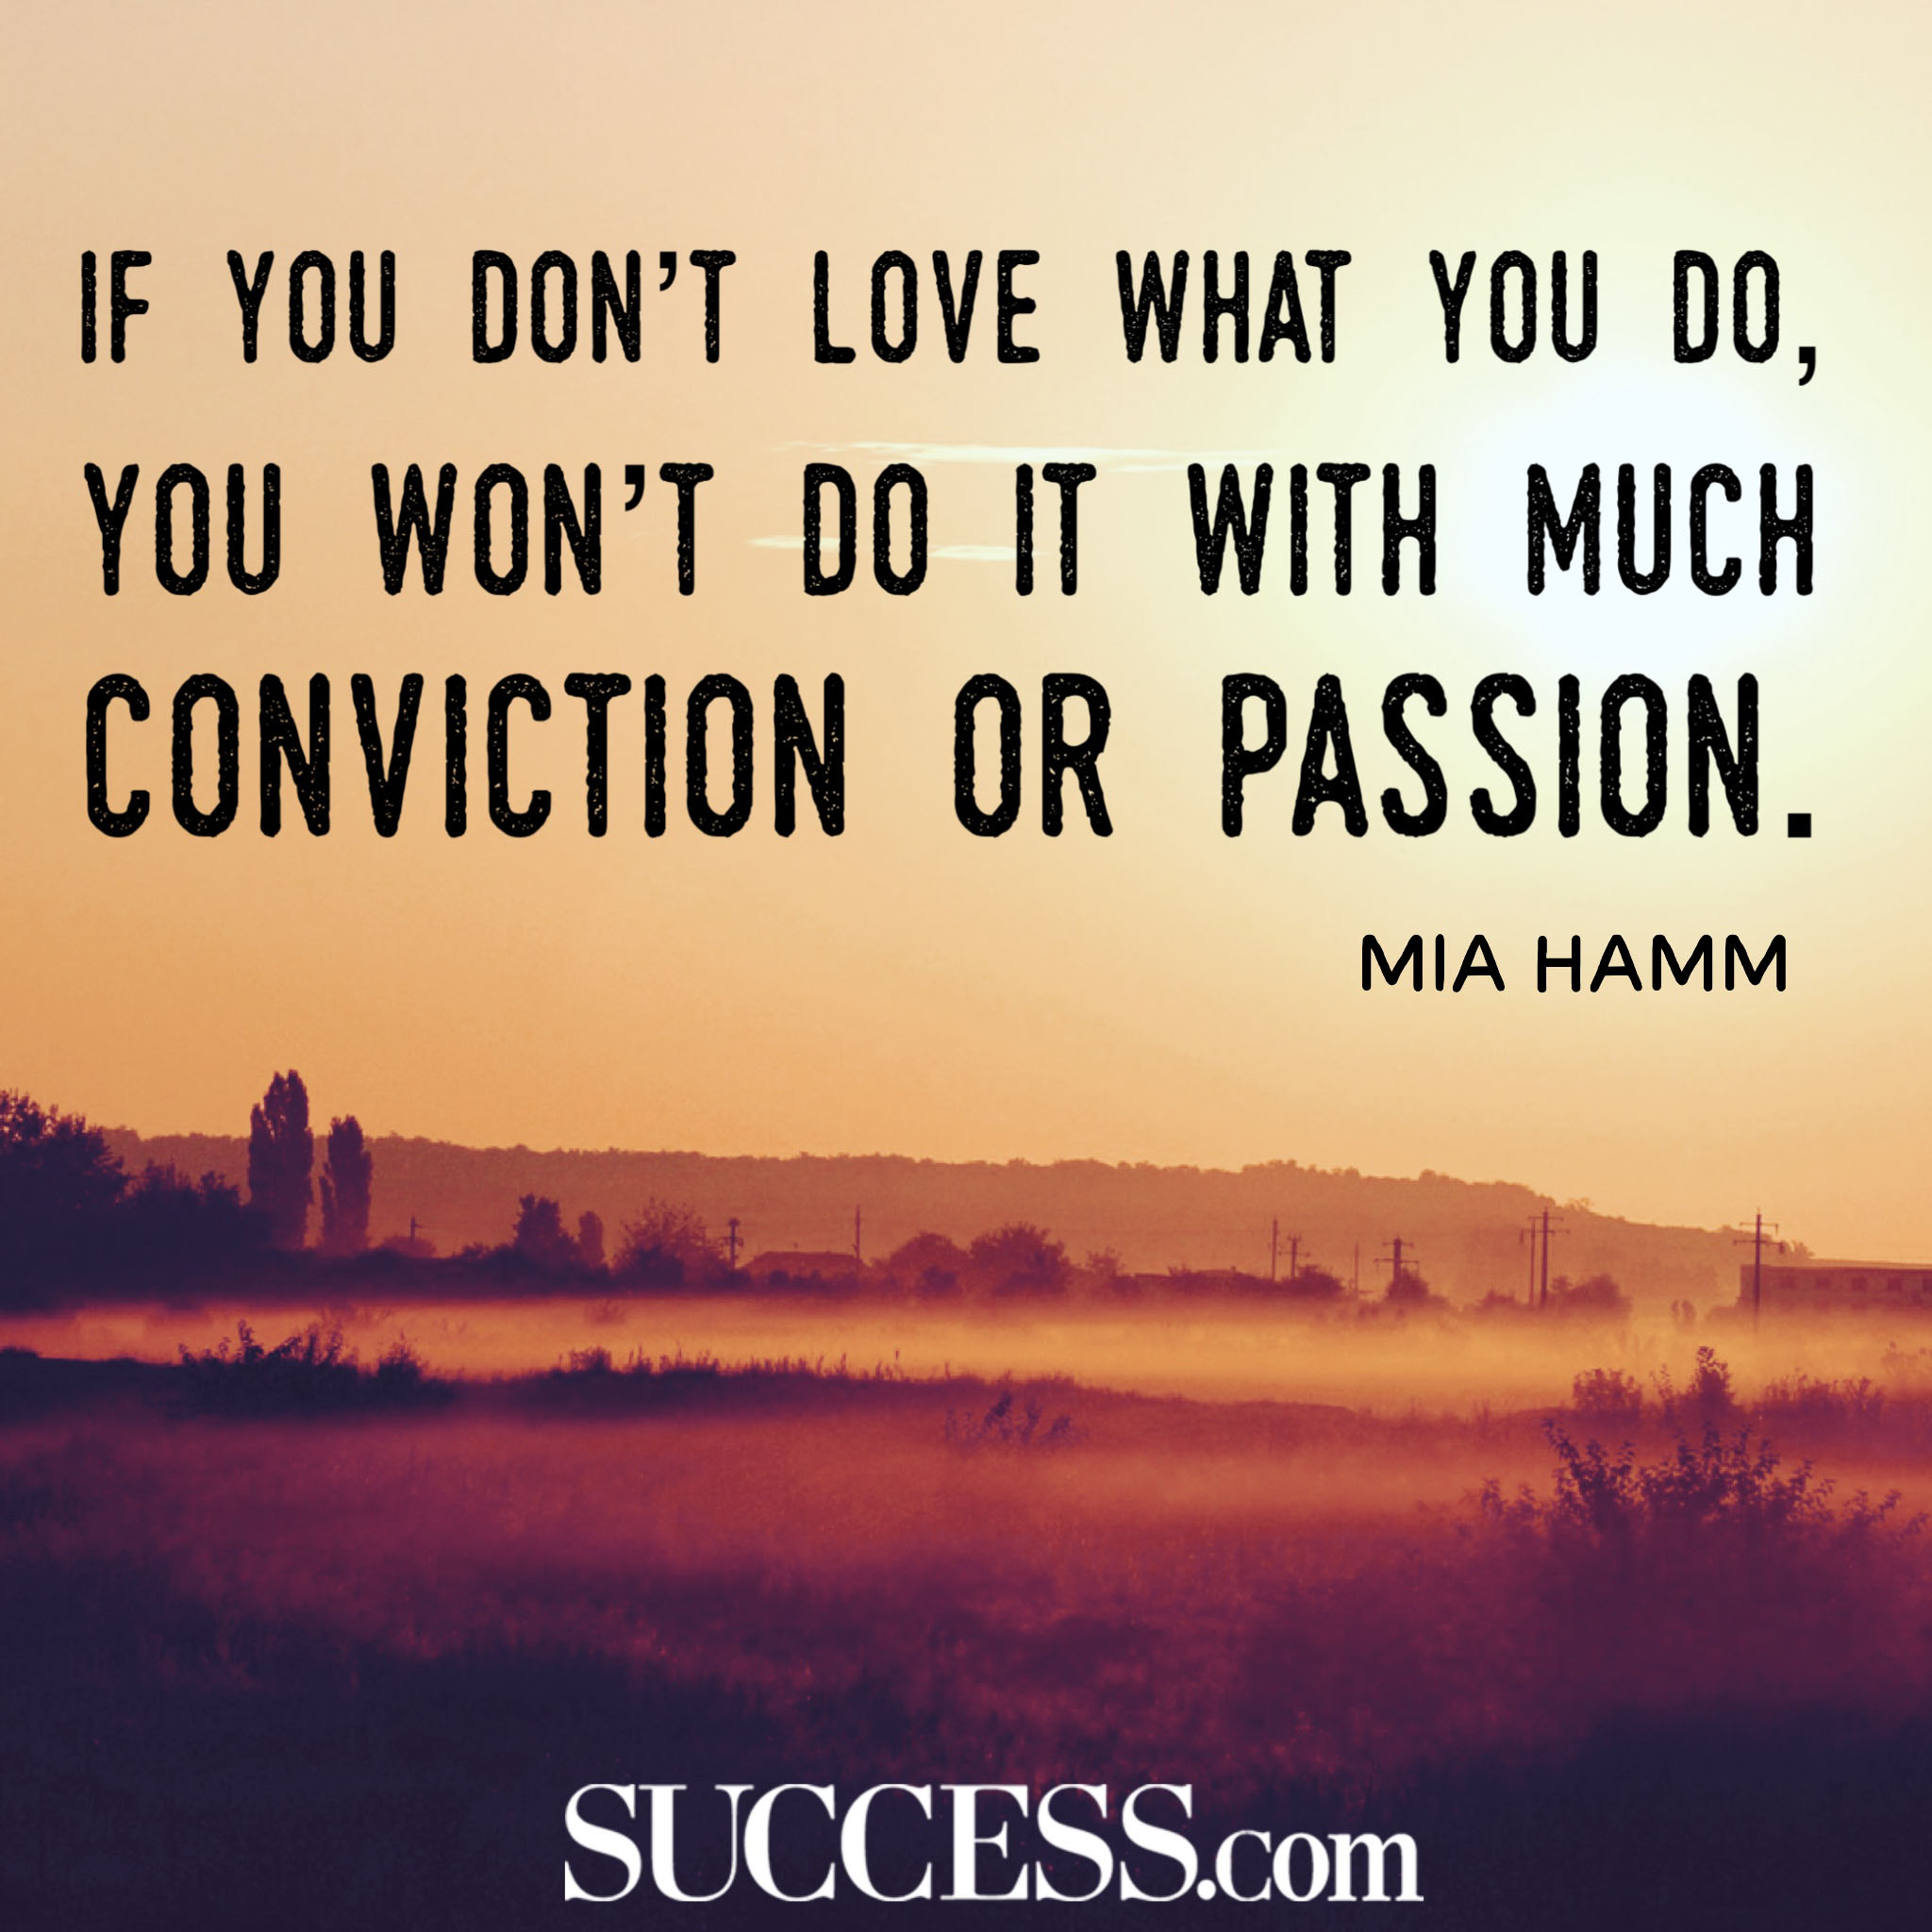 19 Quotes About Following Your Passion